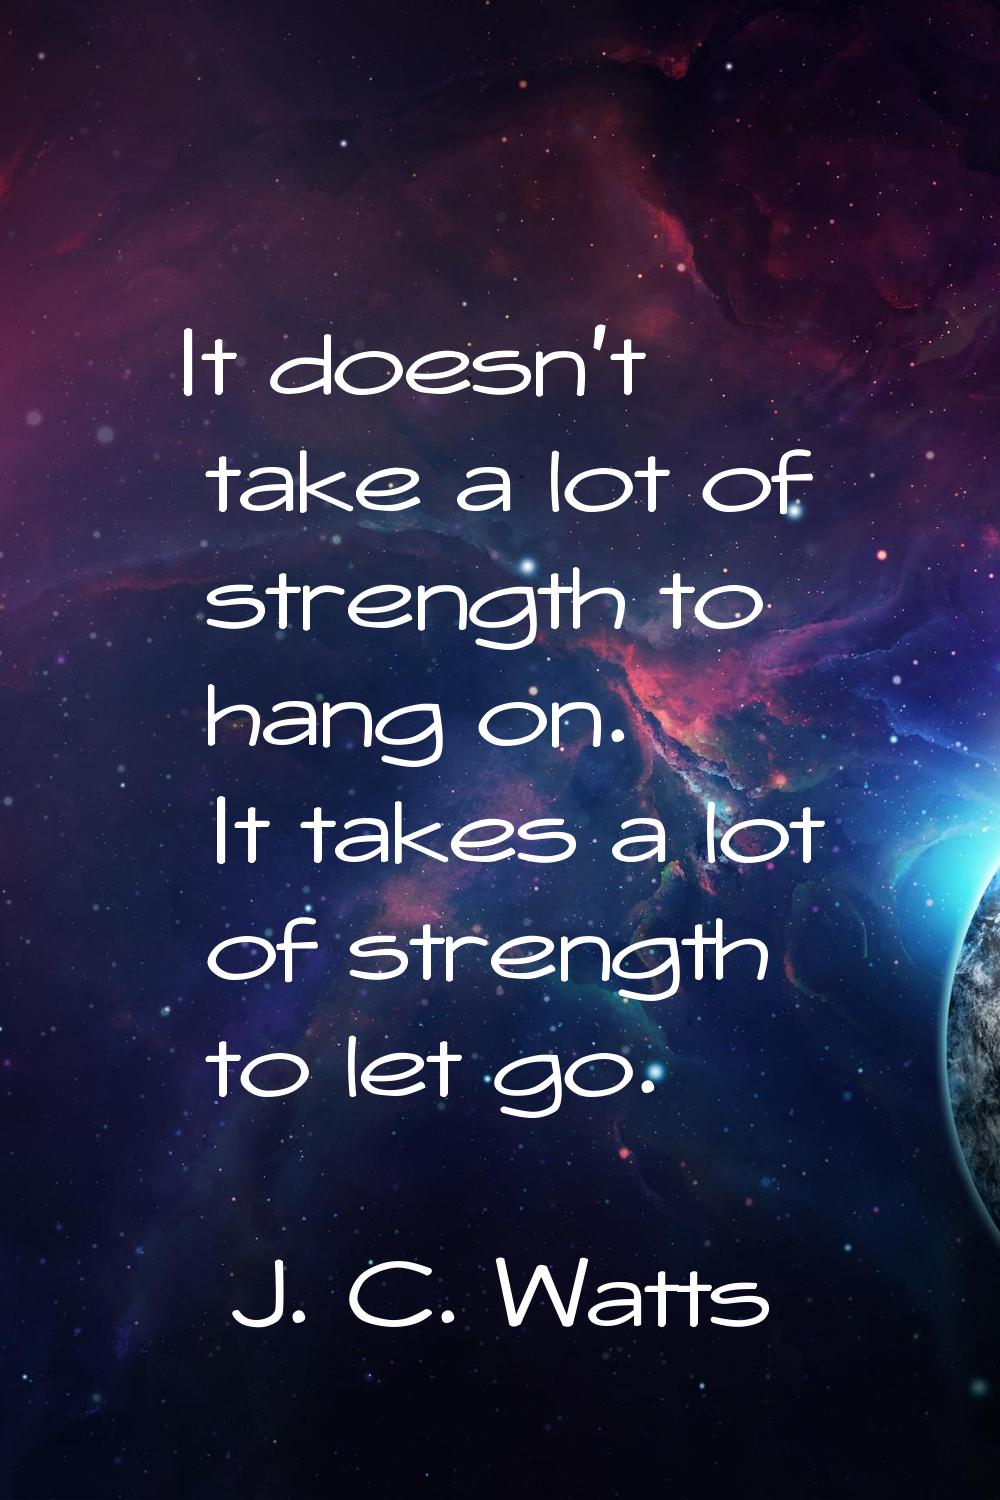 It doesn't take a lot of strength to hang on. It takes a lot of strength to let go.